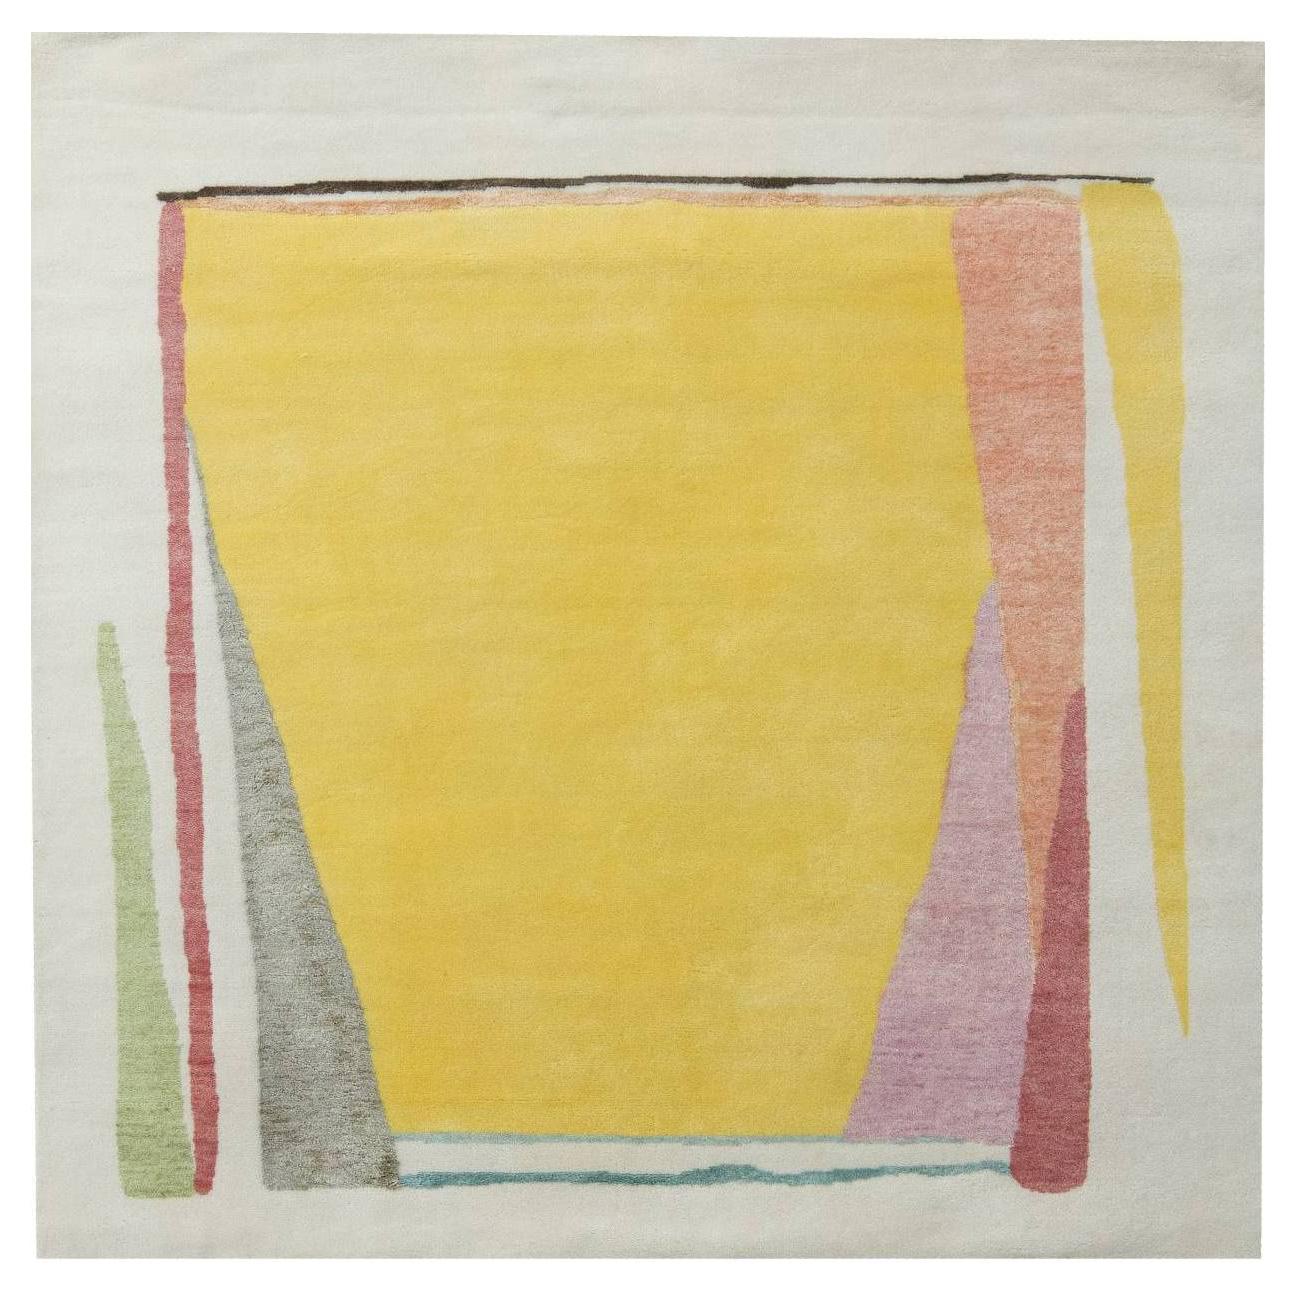  Yellow Abstract Mid Century Modern Rug 5 ft 1 in x 5 ft 2 in For Sale